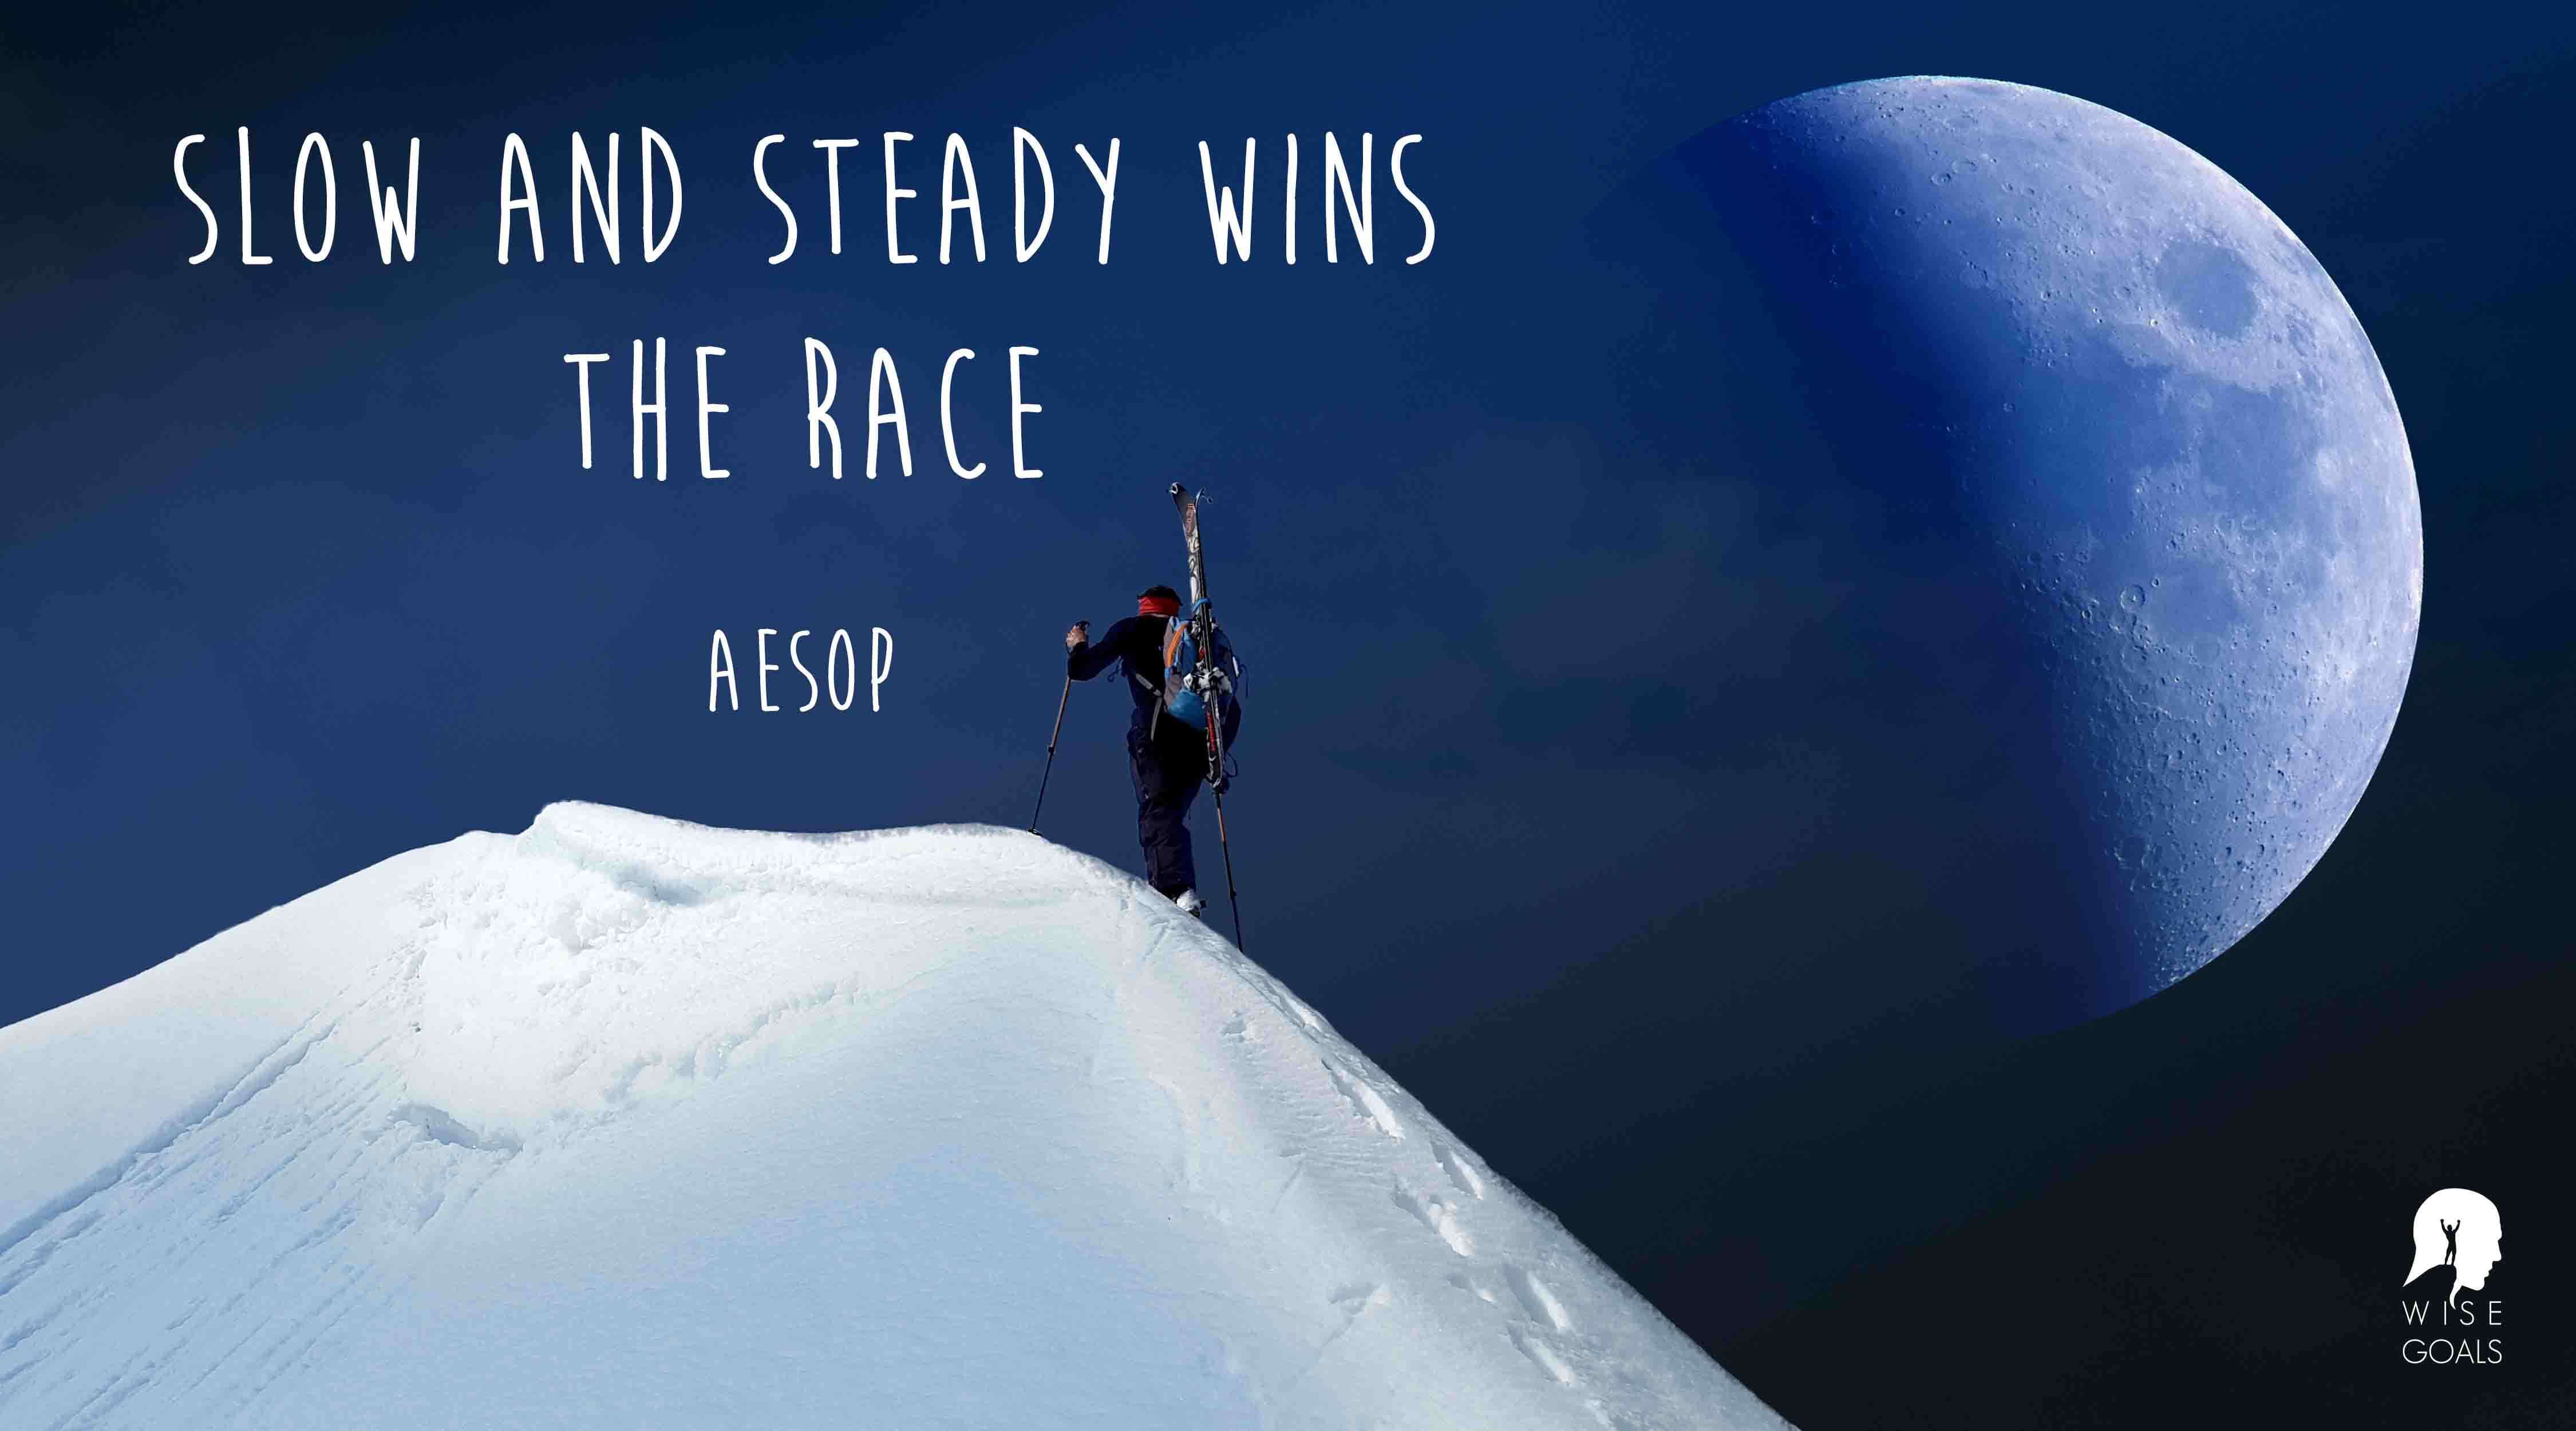 Aesop - Slow and steady wins the race quote 2